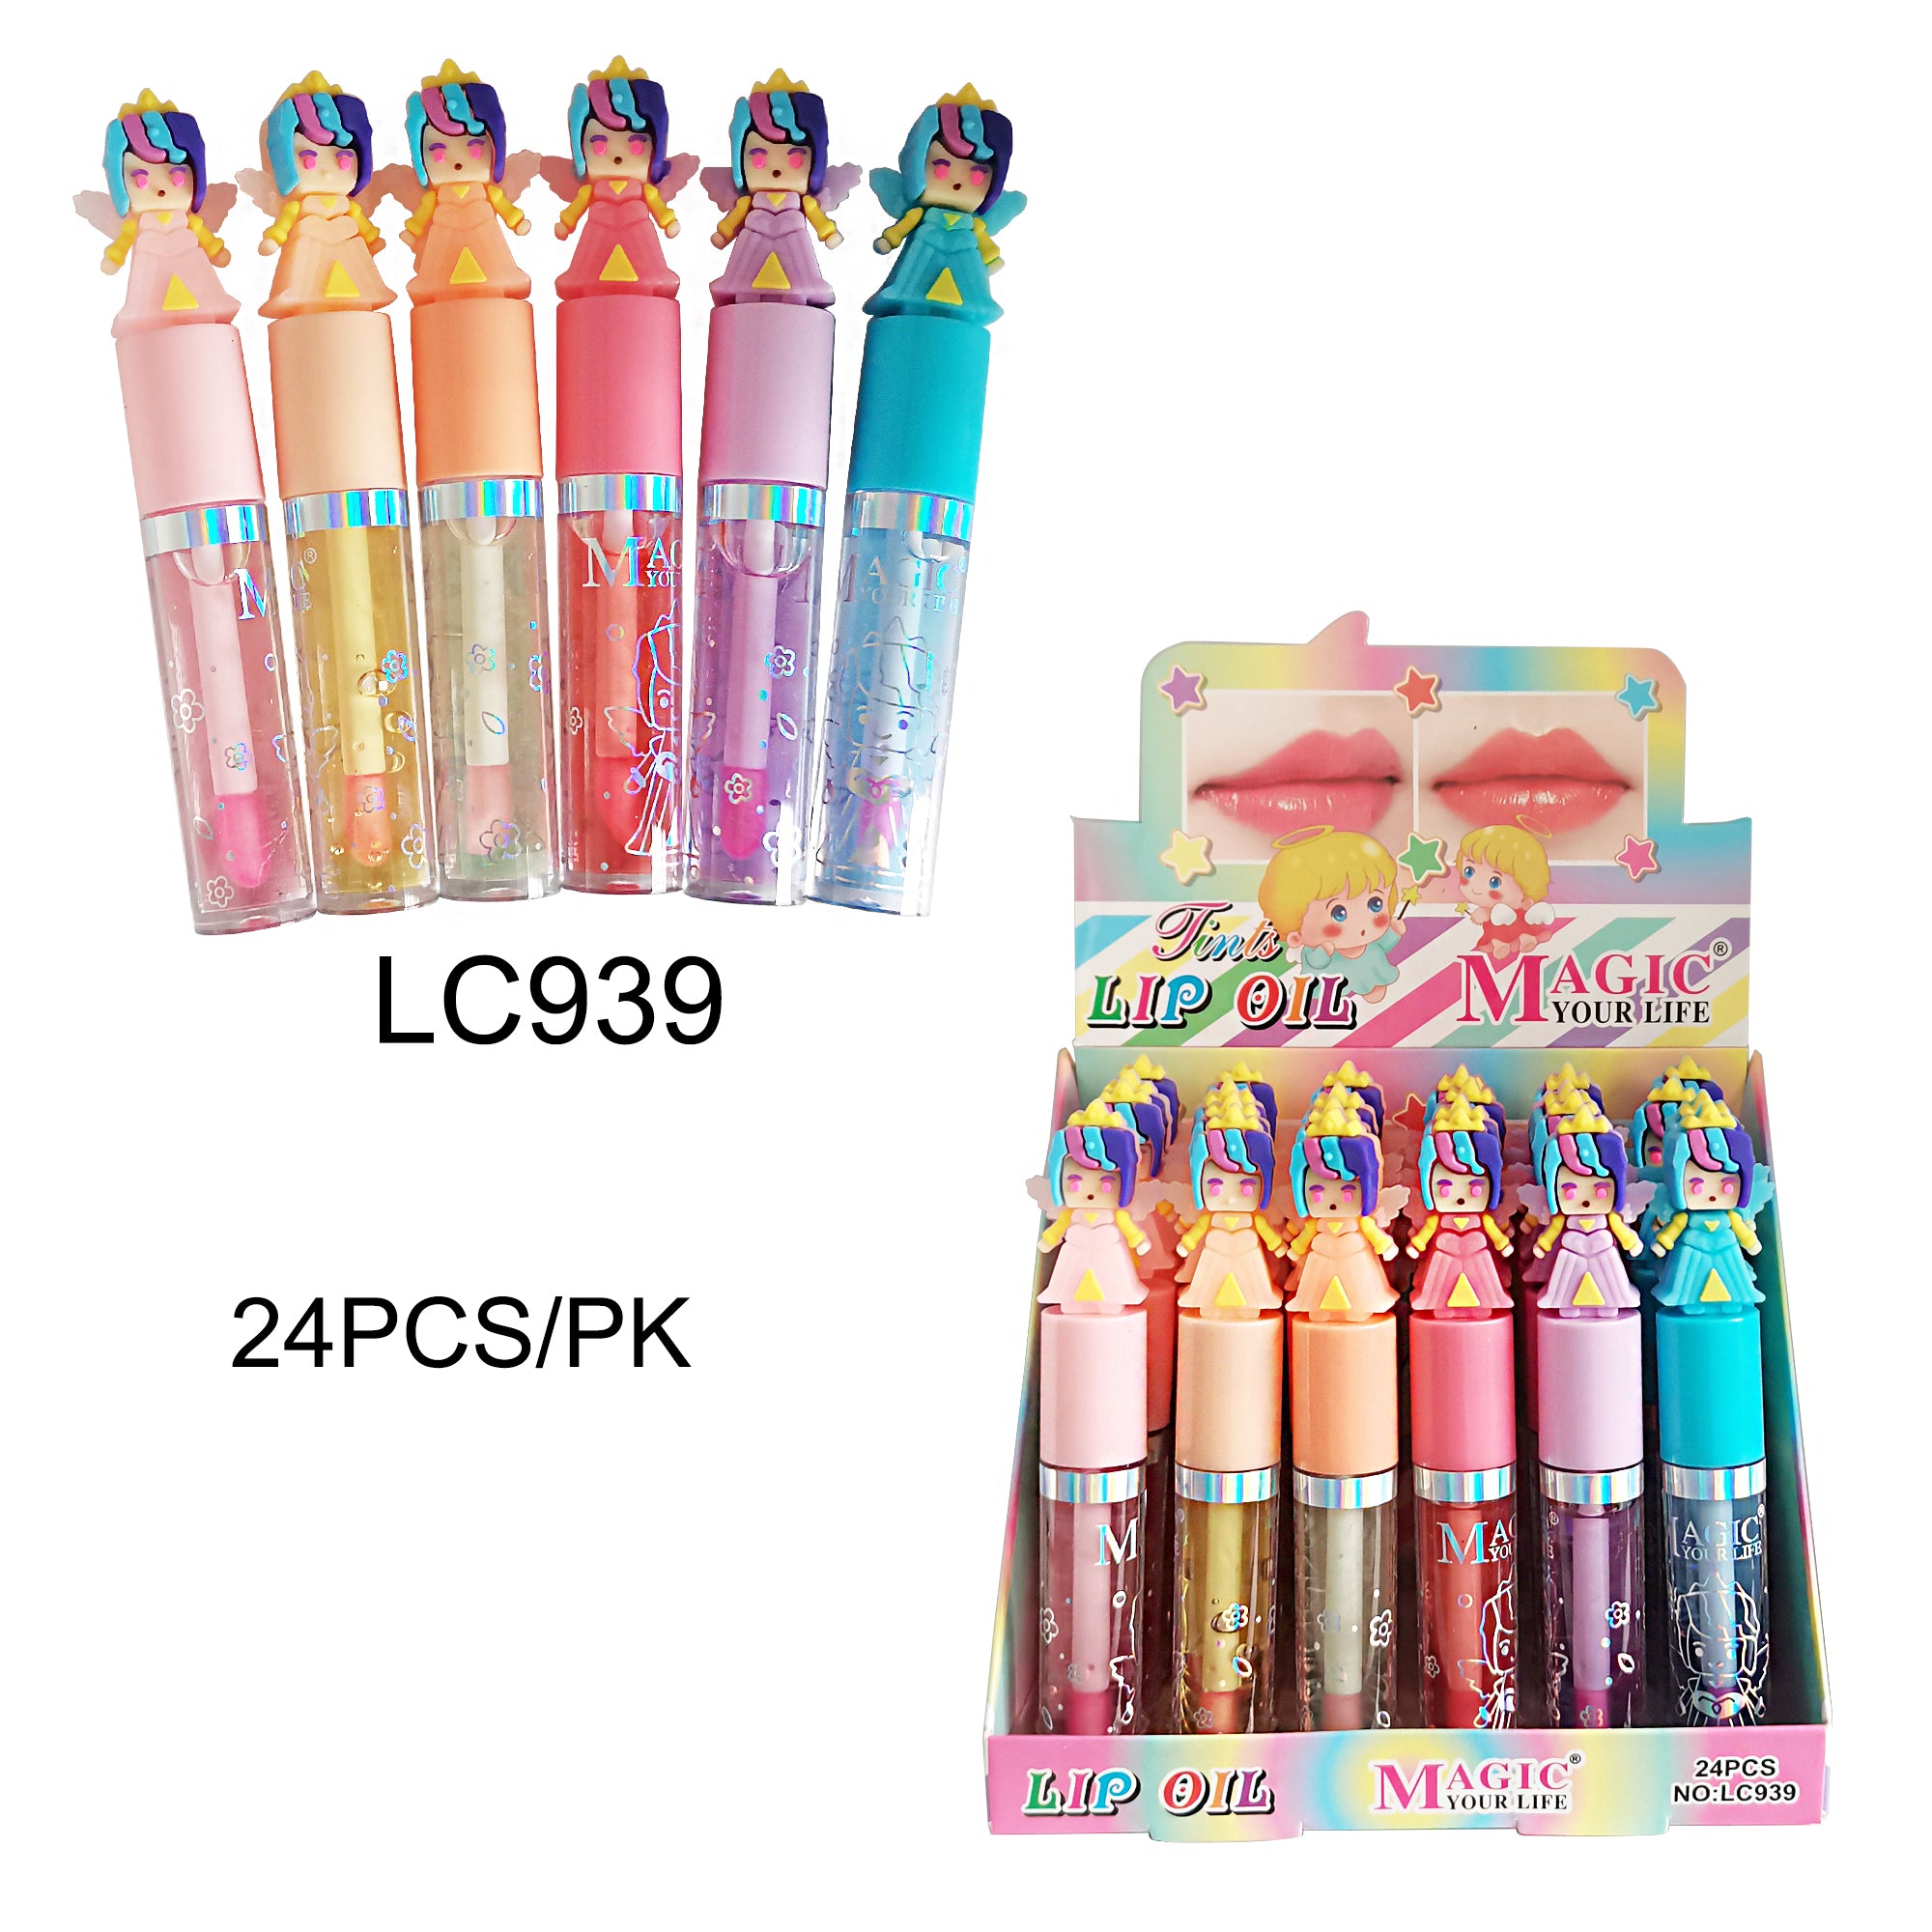 LC939 (24PC)